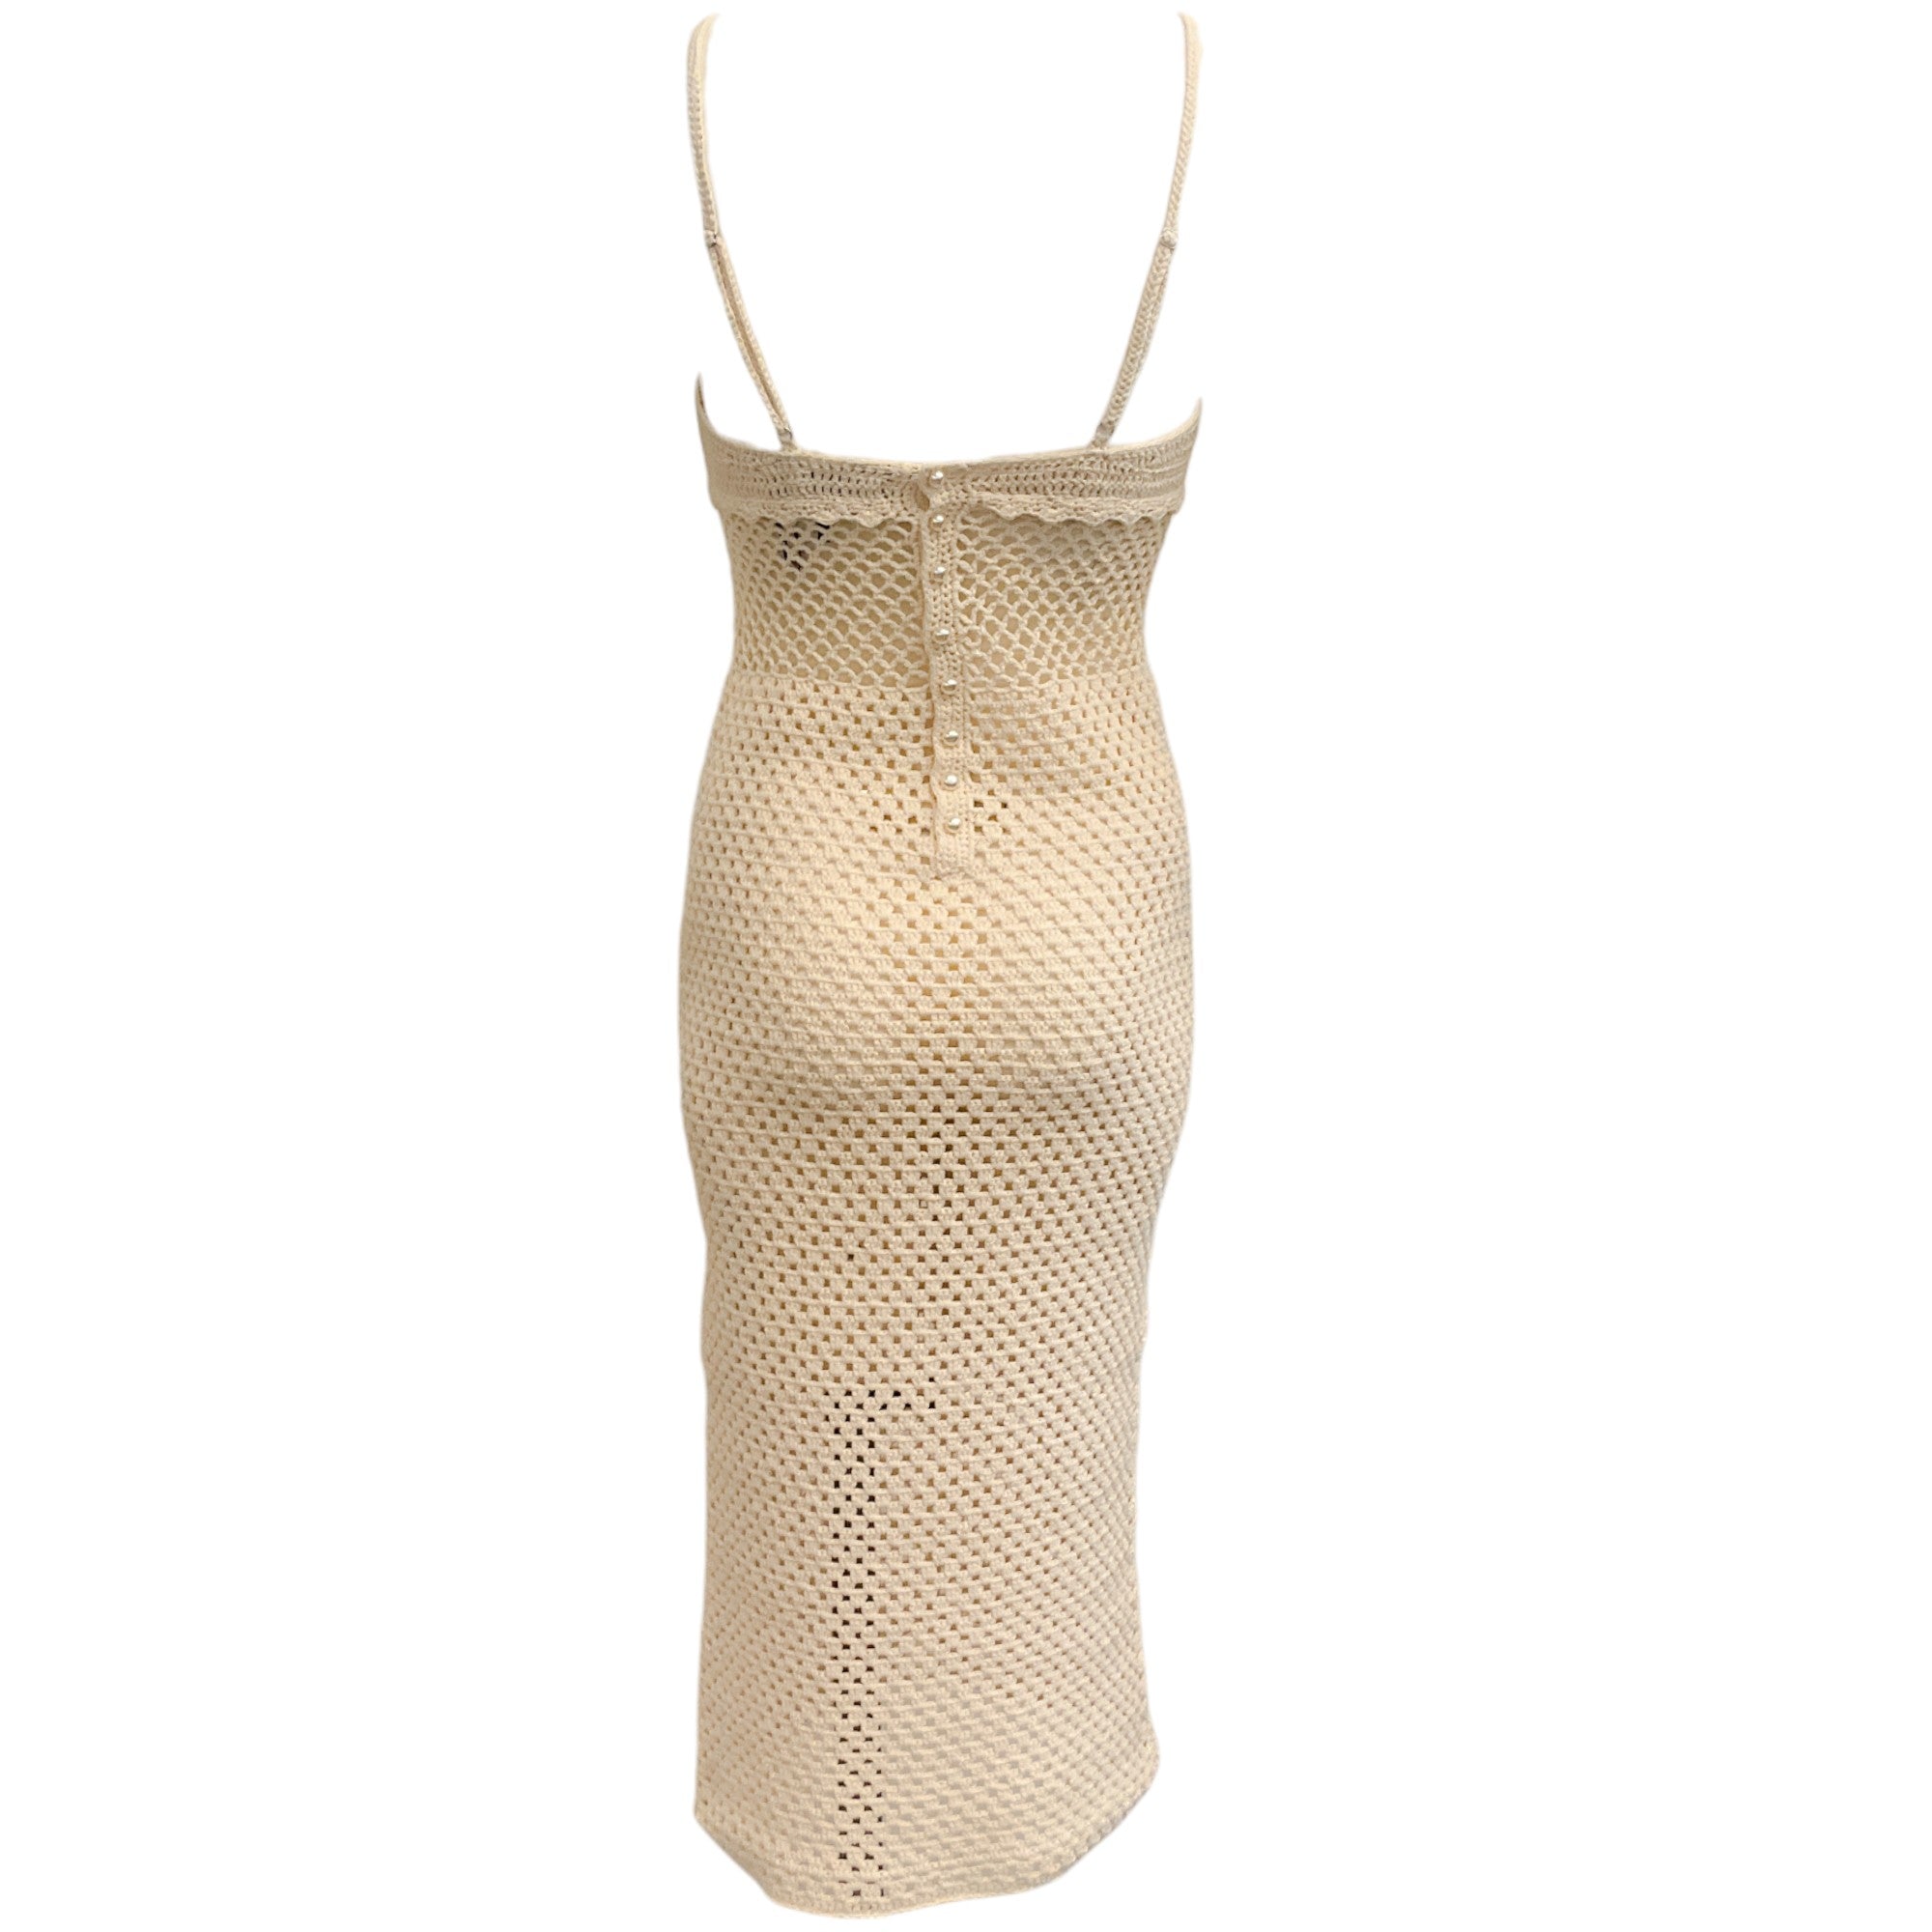 Santicler Ivory Open Knit Crochet Dress with Pearl Buttons